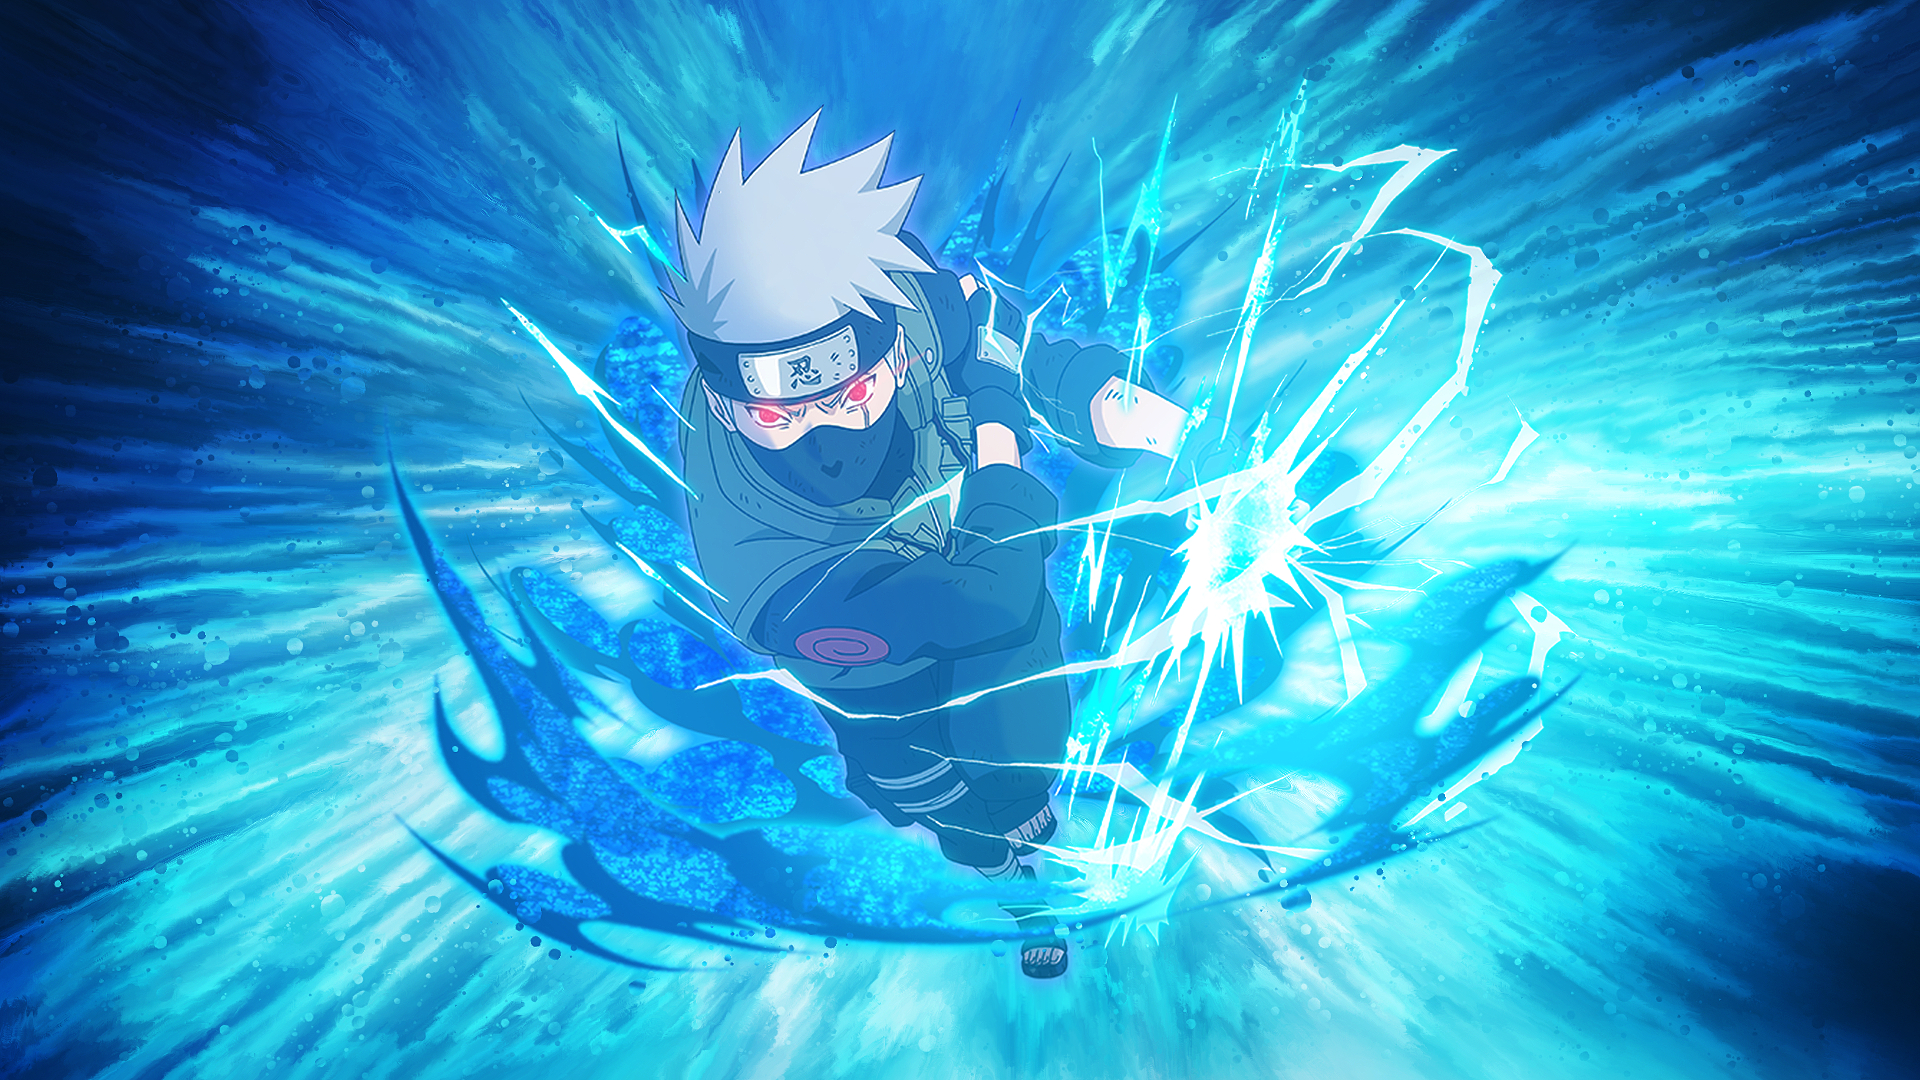 1920x1080 Naruto Wallpapers Top 75 Best Naruto Backgrounds Download